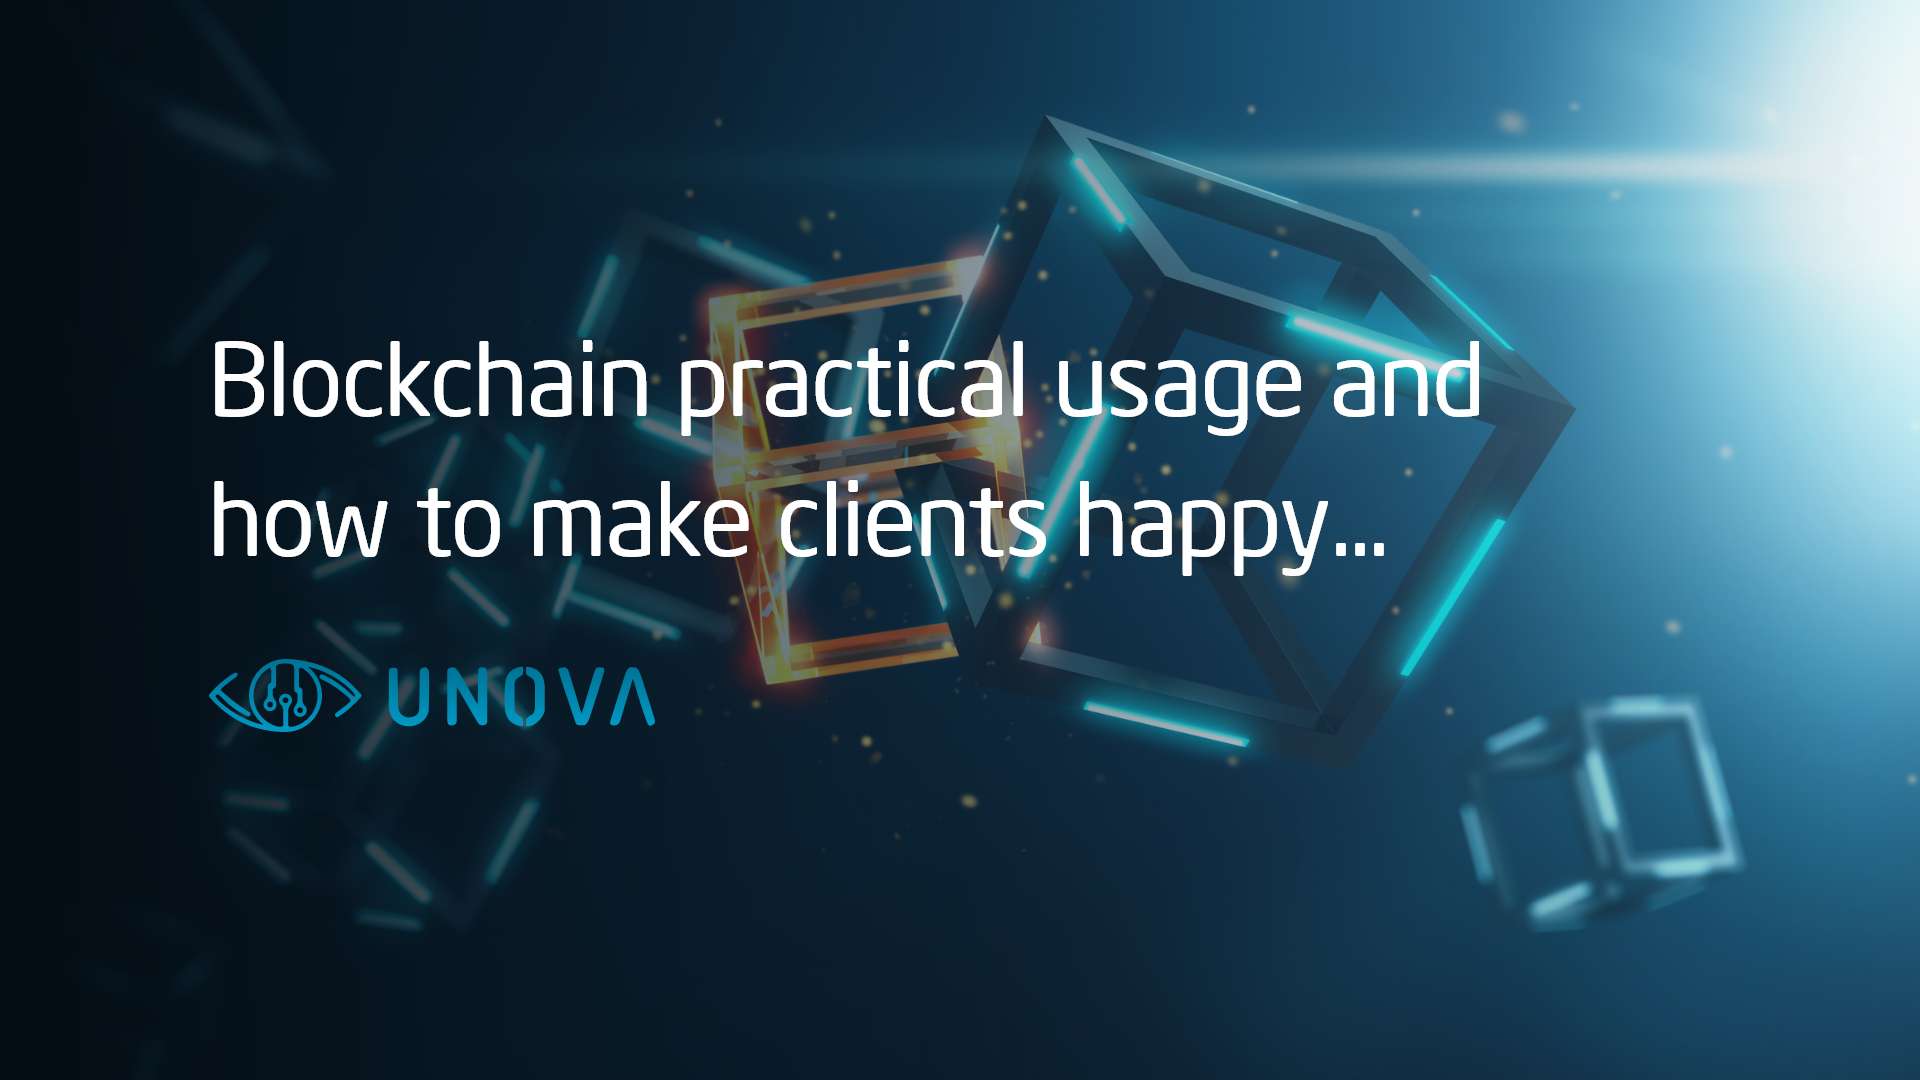 Blockchain practical usage and how to make clients happy